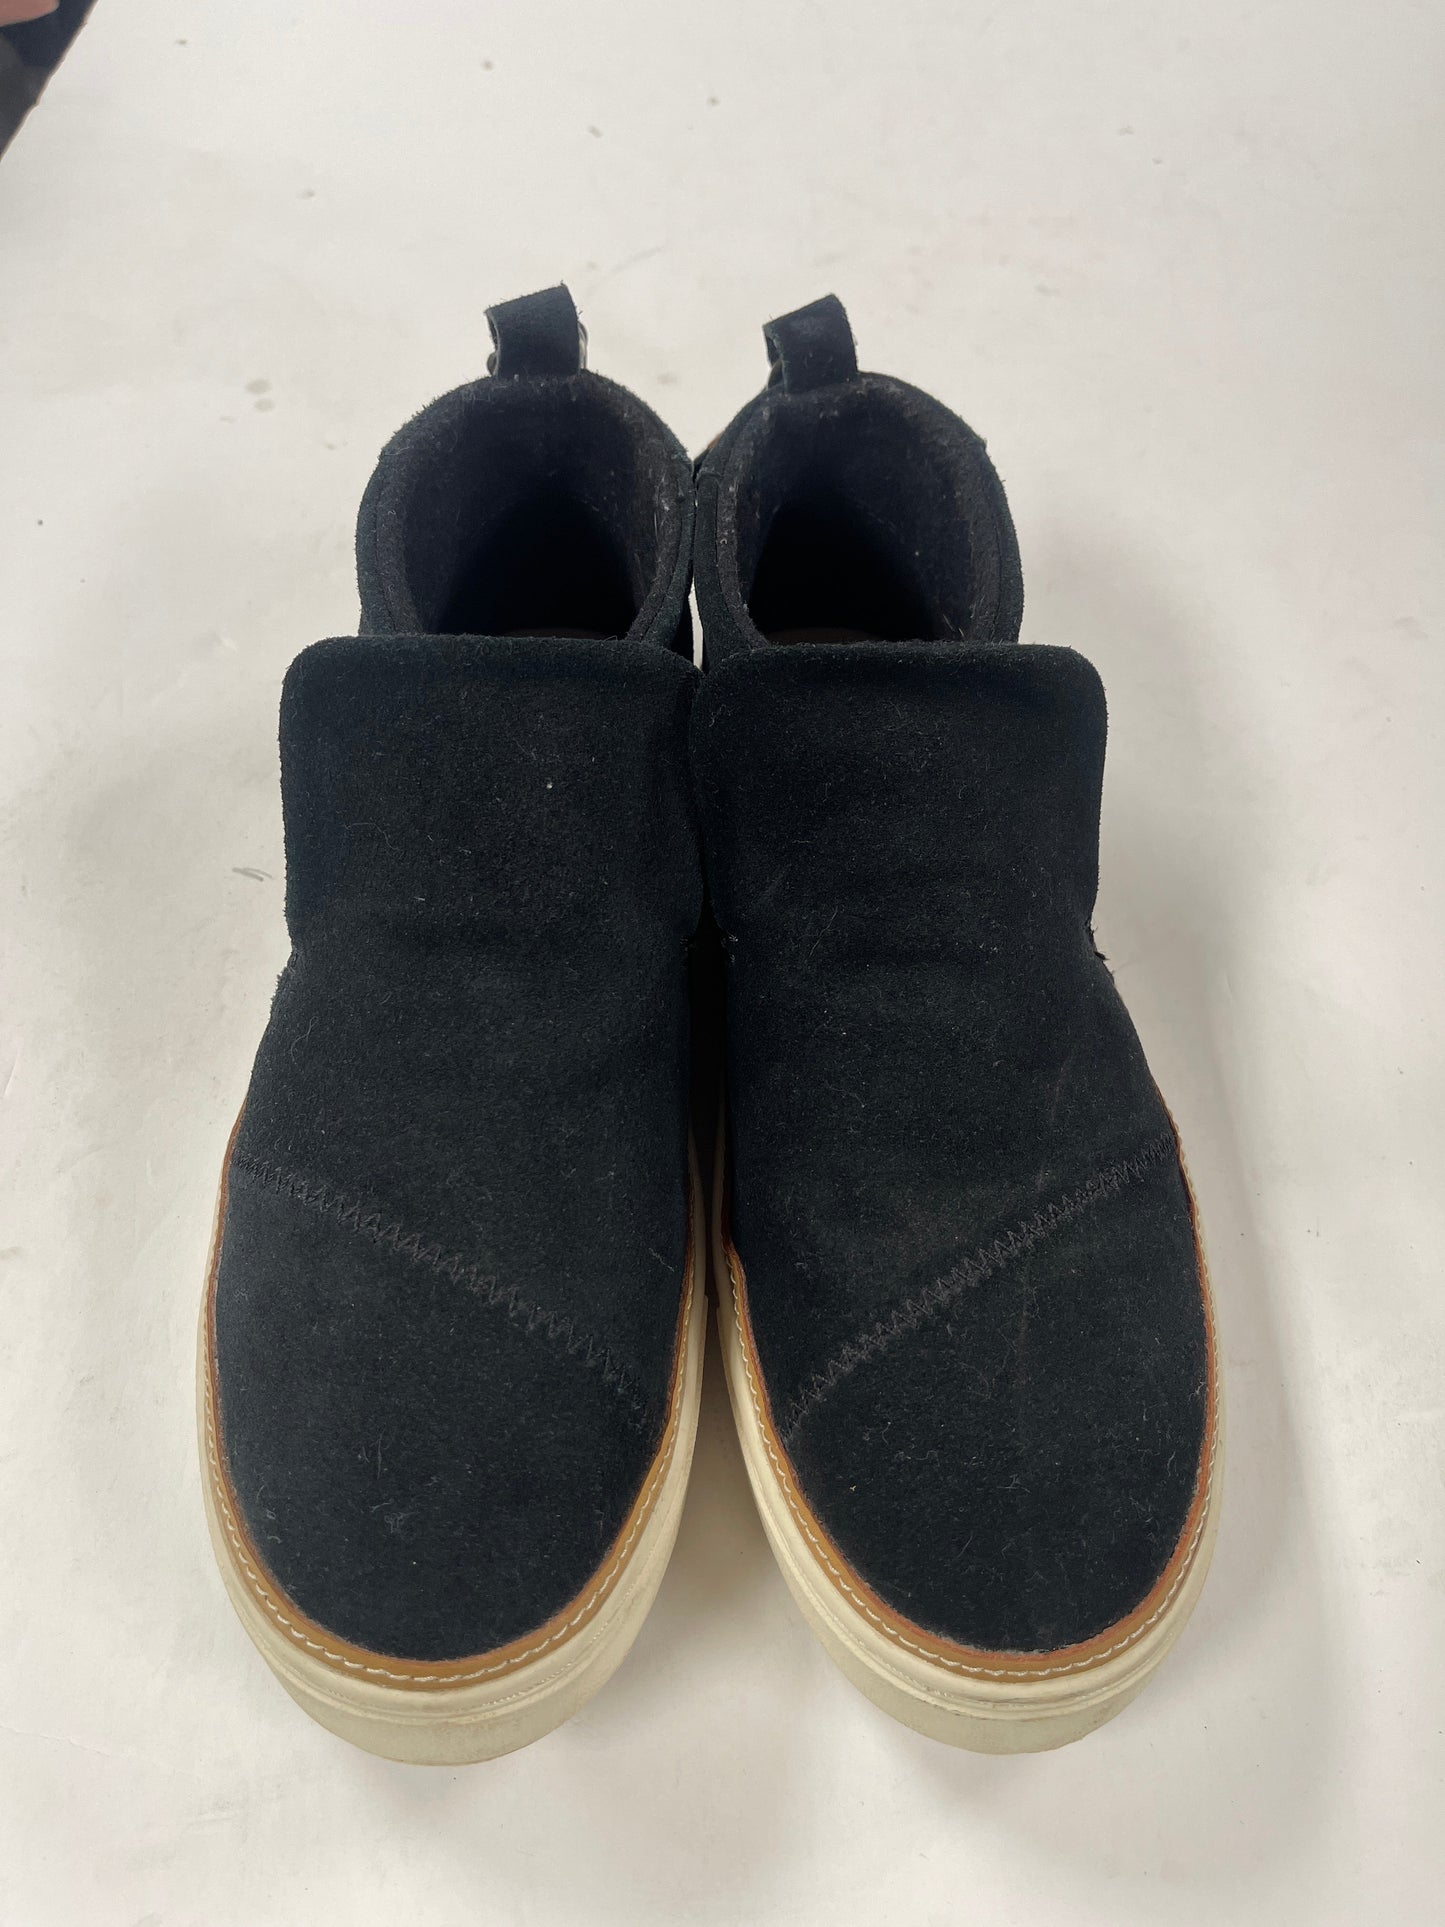 Black Shoes Sneakers Toms, Size 8